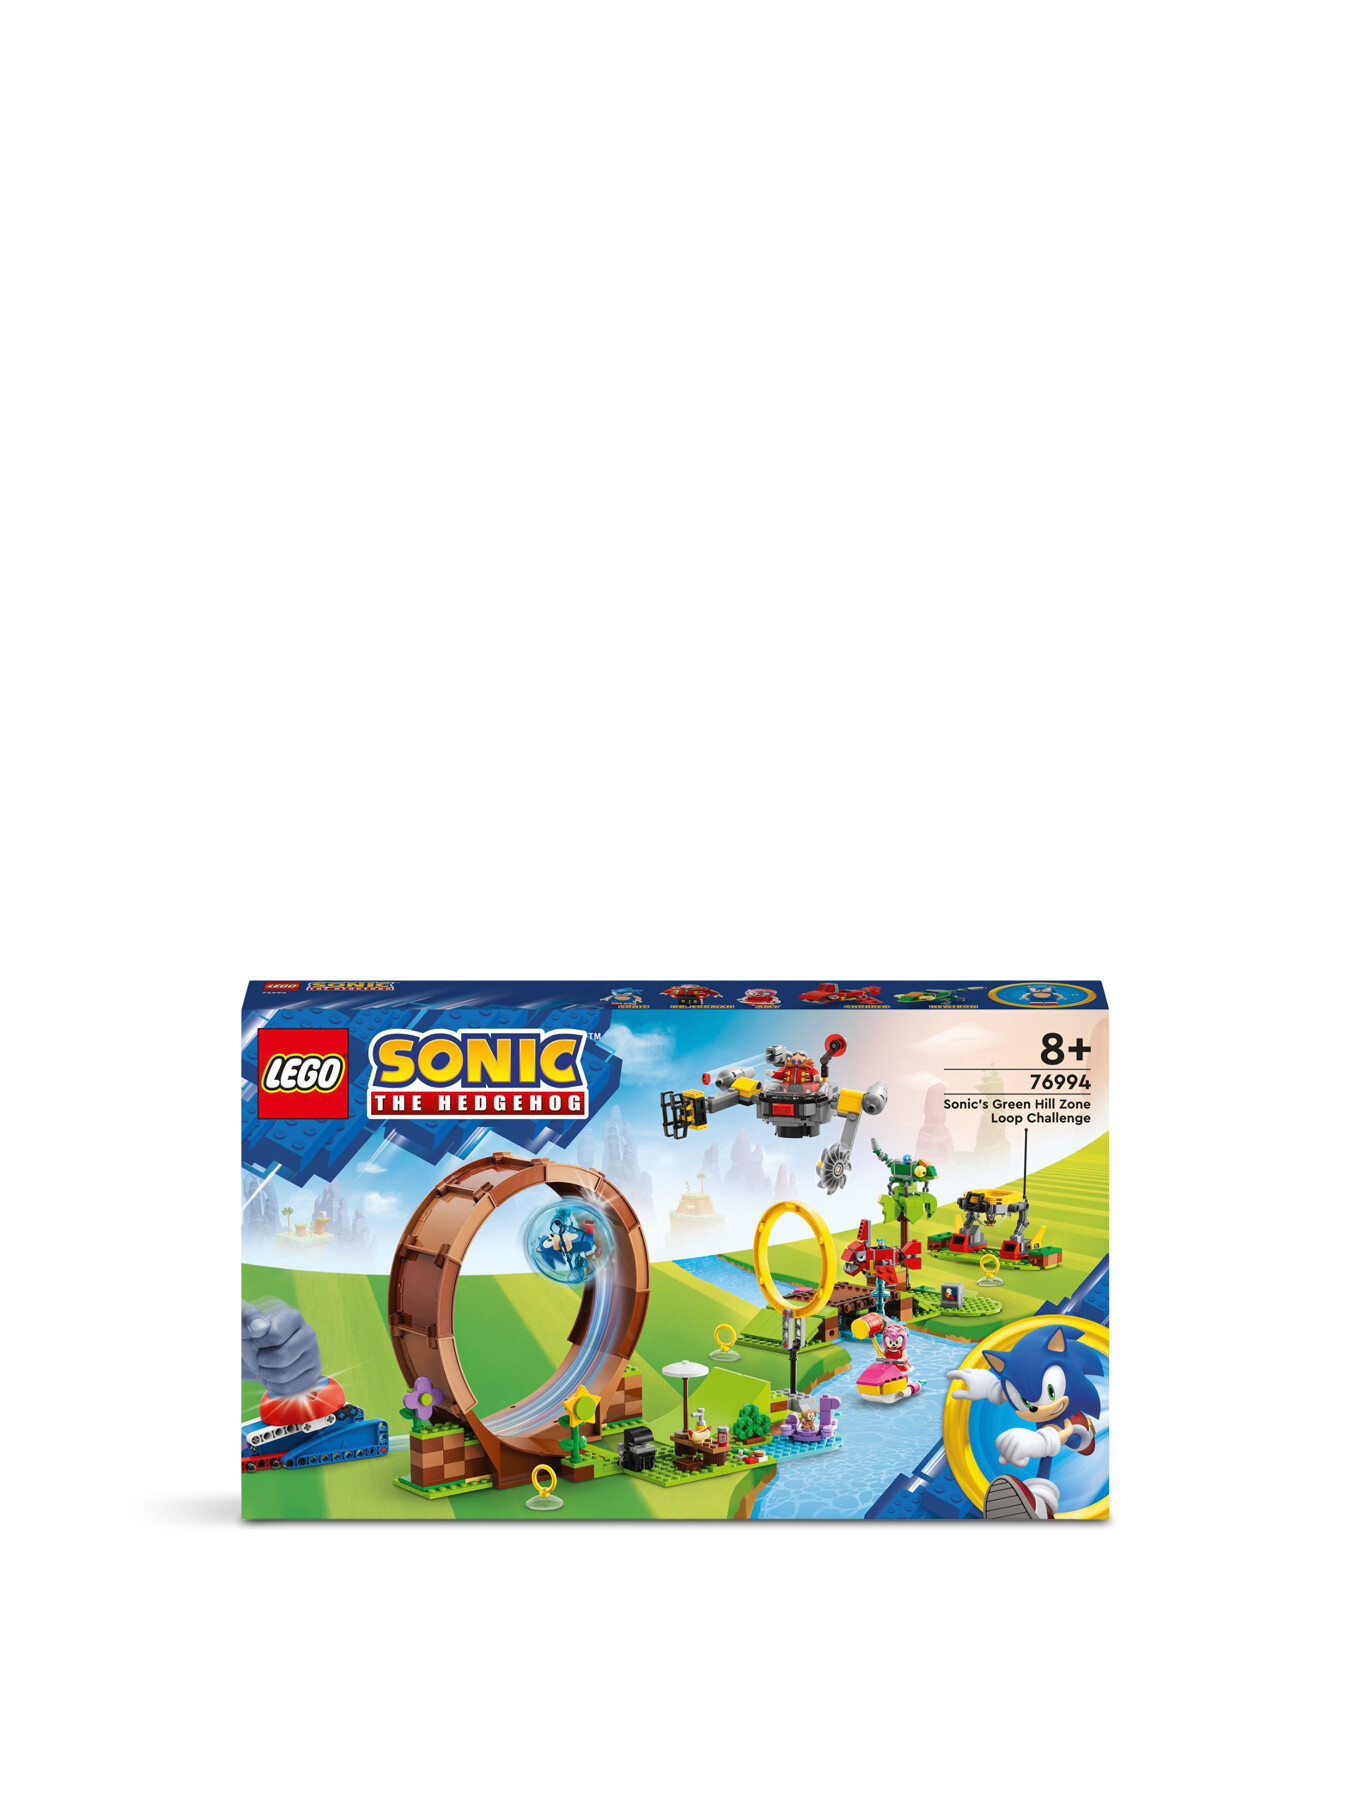 LEGO Sonic the Hedgehog Sonic's Green Hill Zone Loop Challenge 76994  Building Set